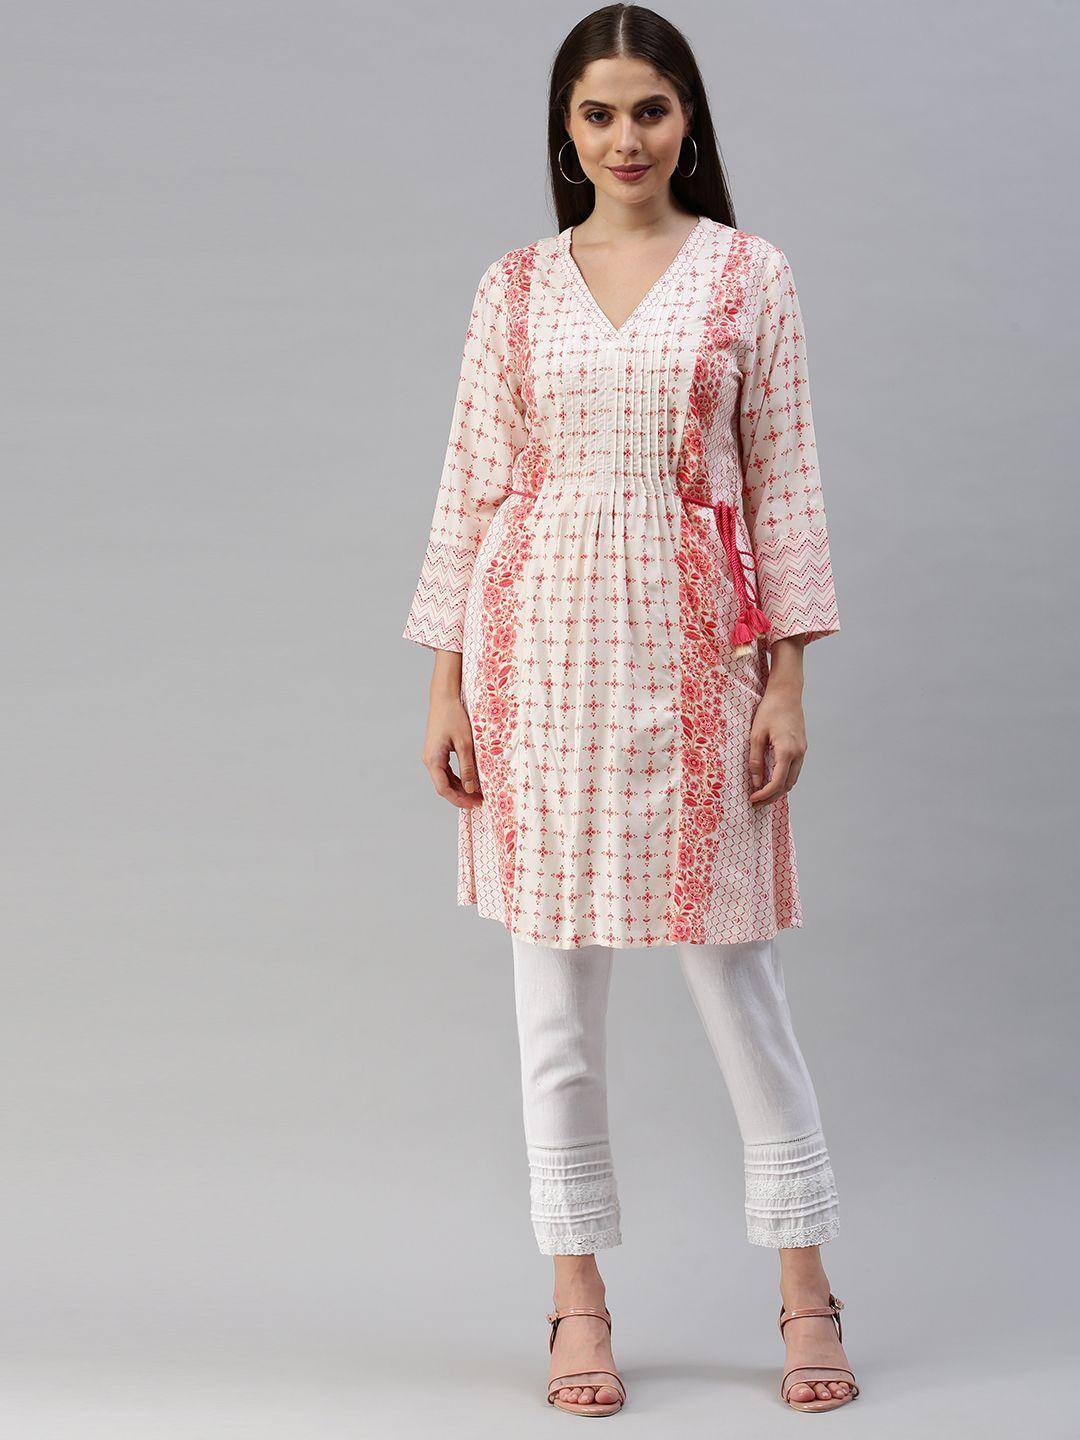 global-desi-off-white-&-pink-viscose-printed-side-tie-up-tunic